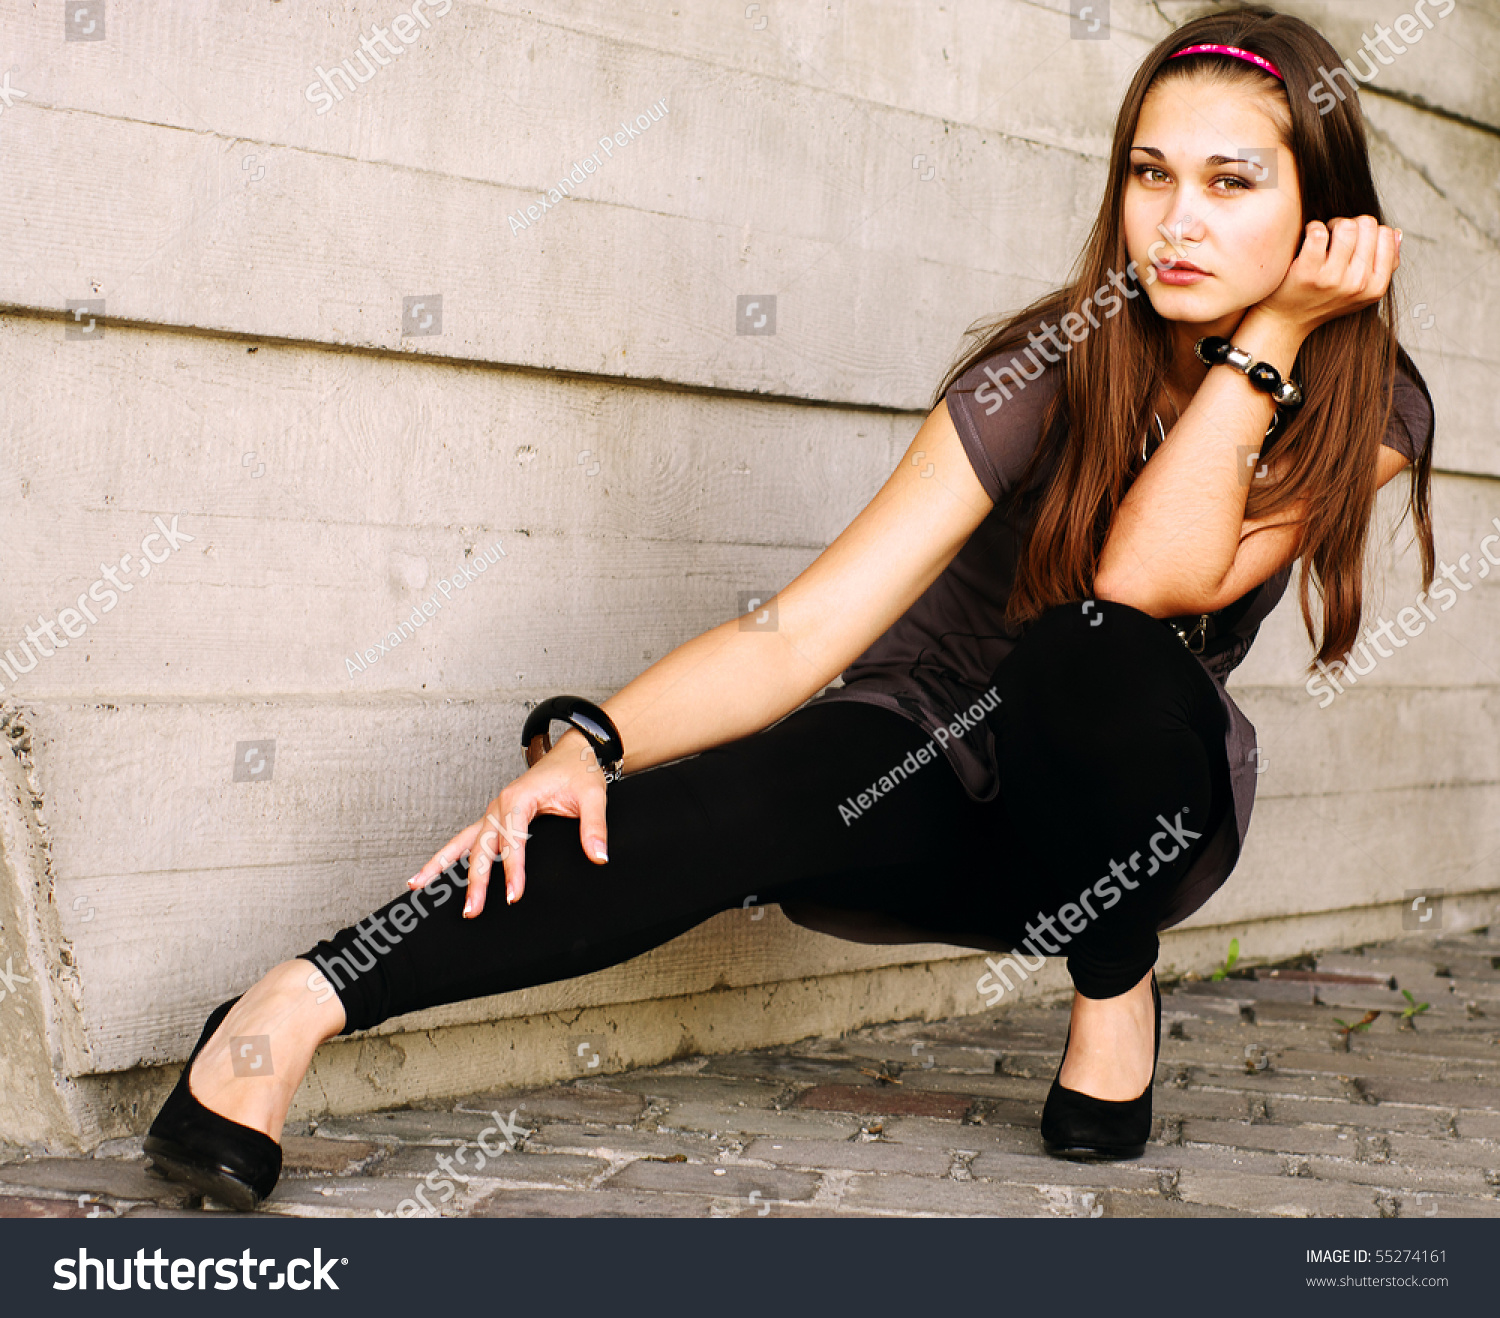 Sepia Portrait Of The Girl Full Body Squatting By The